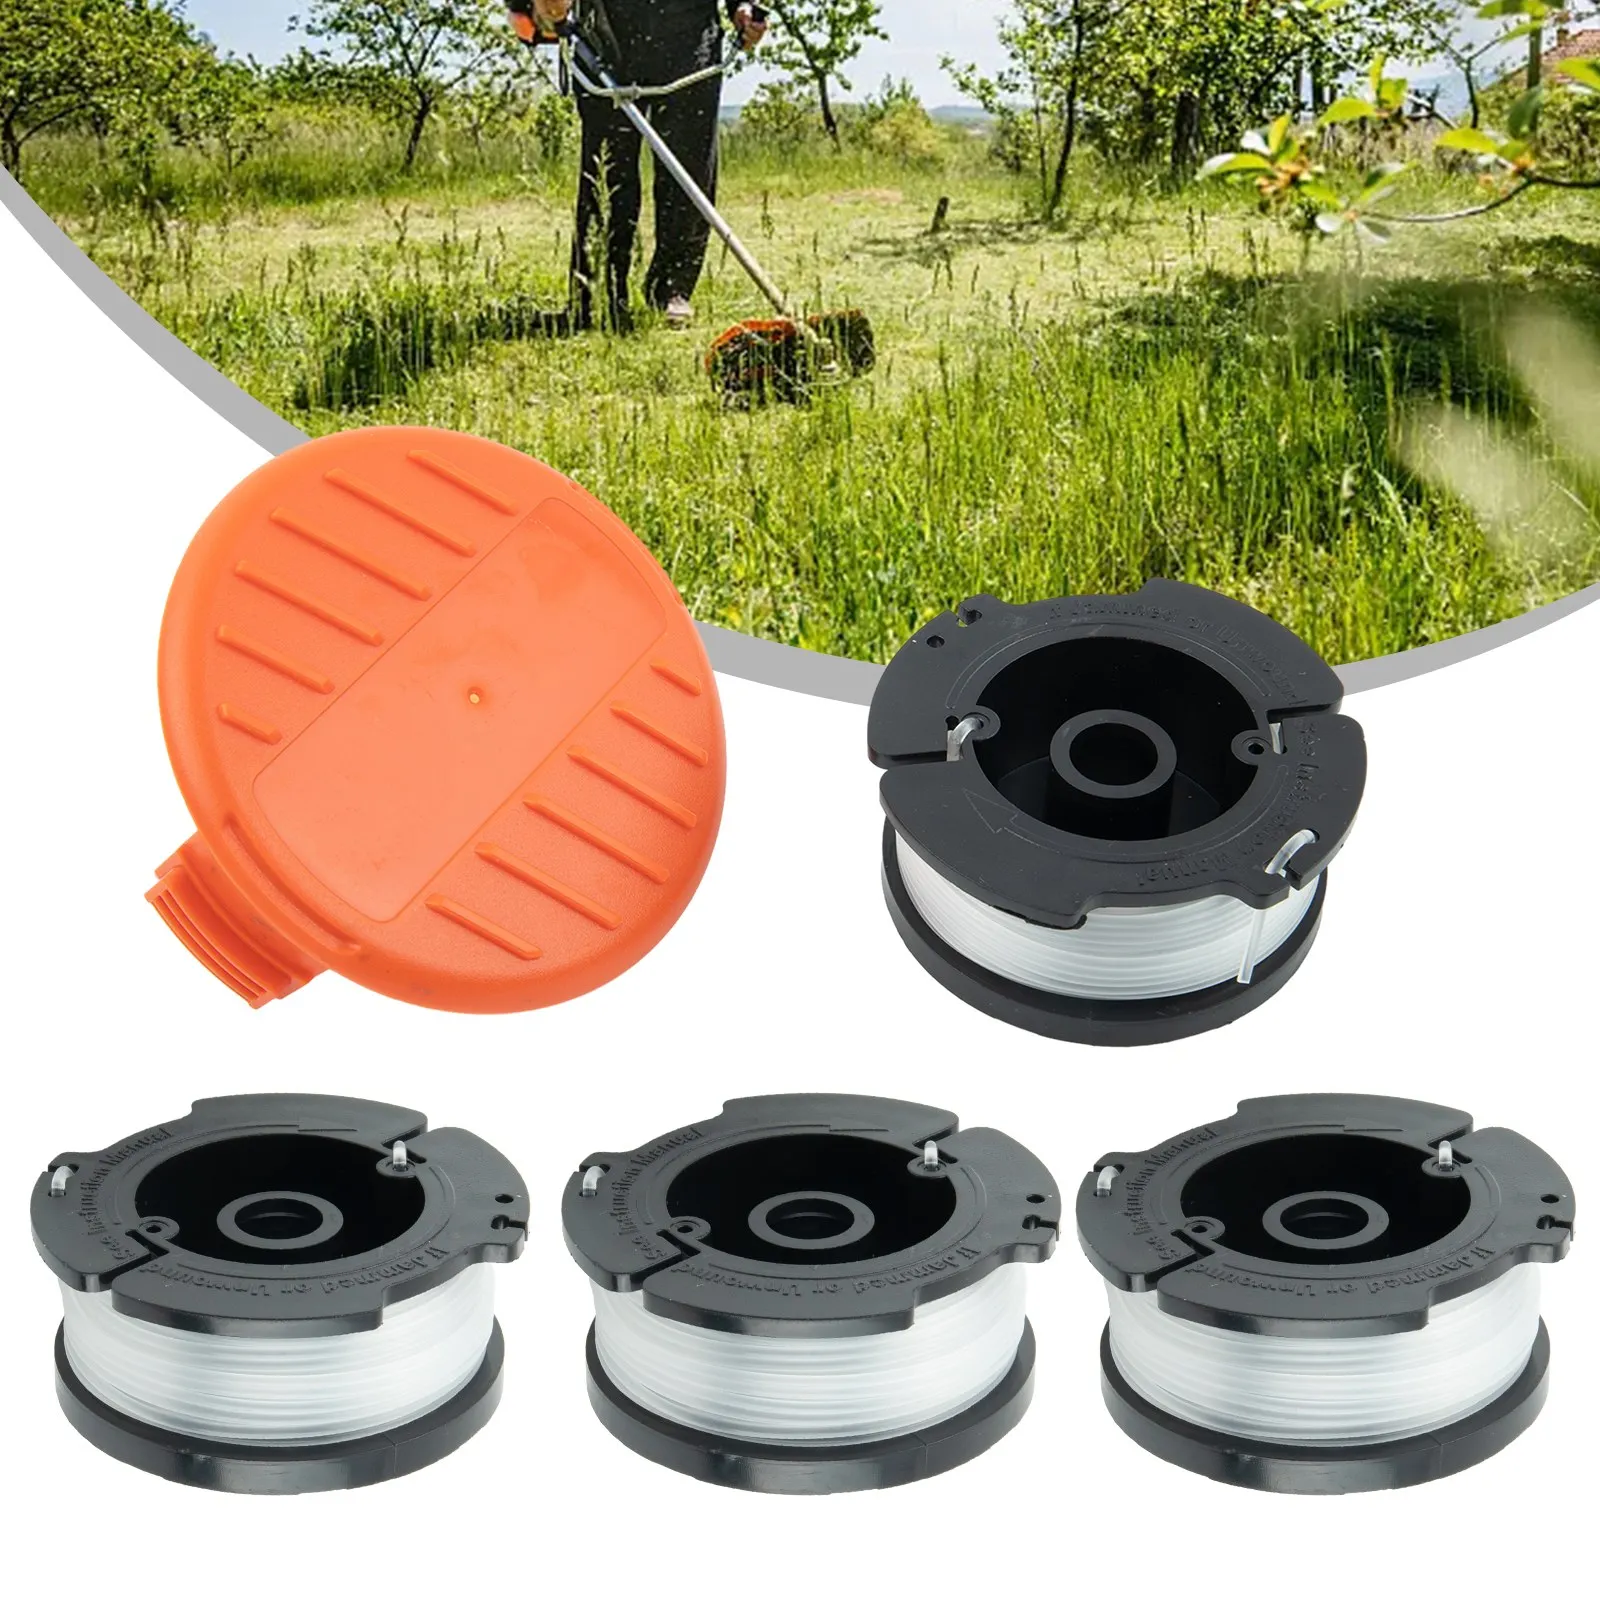 https://ae01.alicdn.com/kf/S54c16541a2a448acb5f975aaf69462807/With-Feathers-Spools-1-Set-Delicate-Easy-To-Install-For-Black-Decker-Grass-Highly-Match-Lawn.jpeg